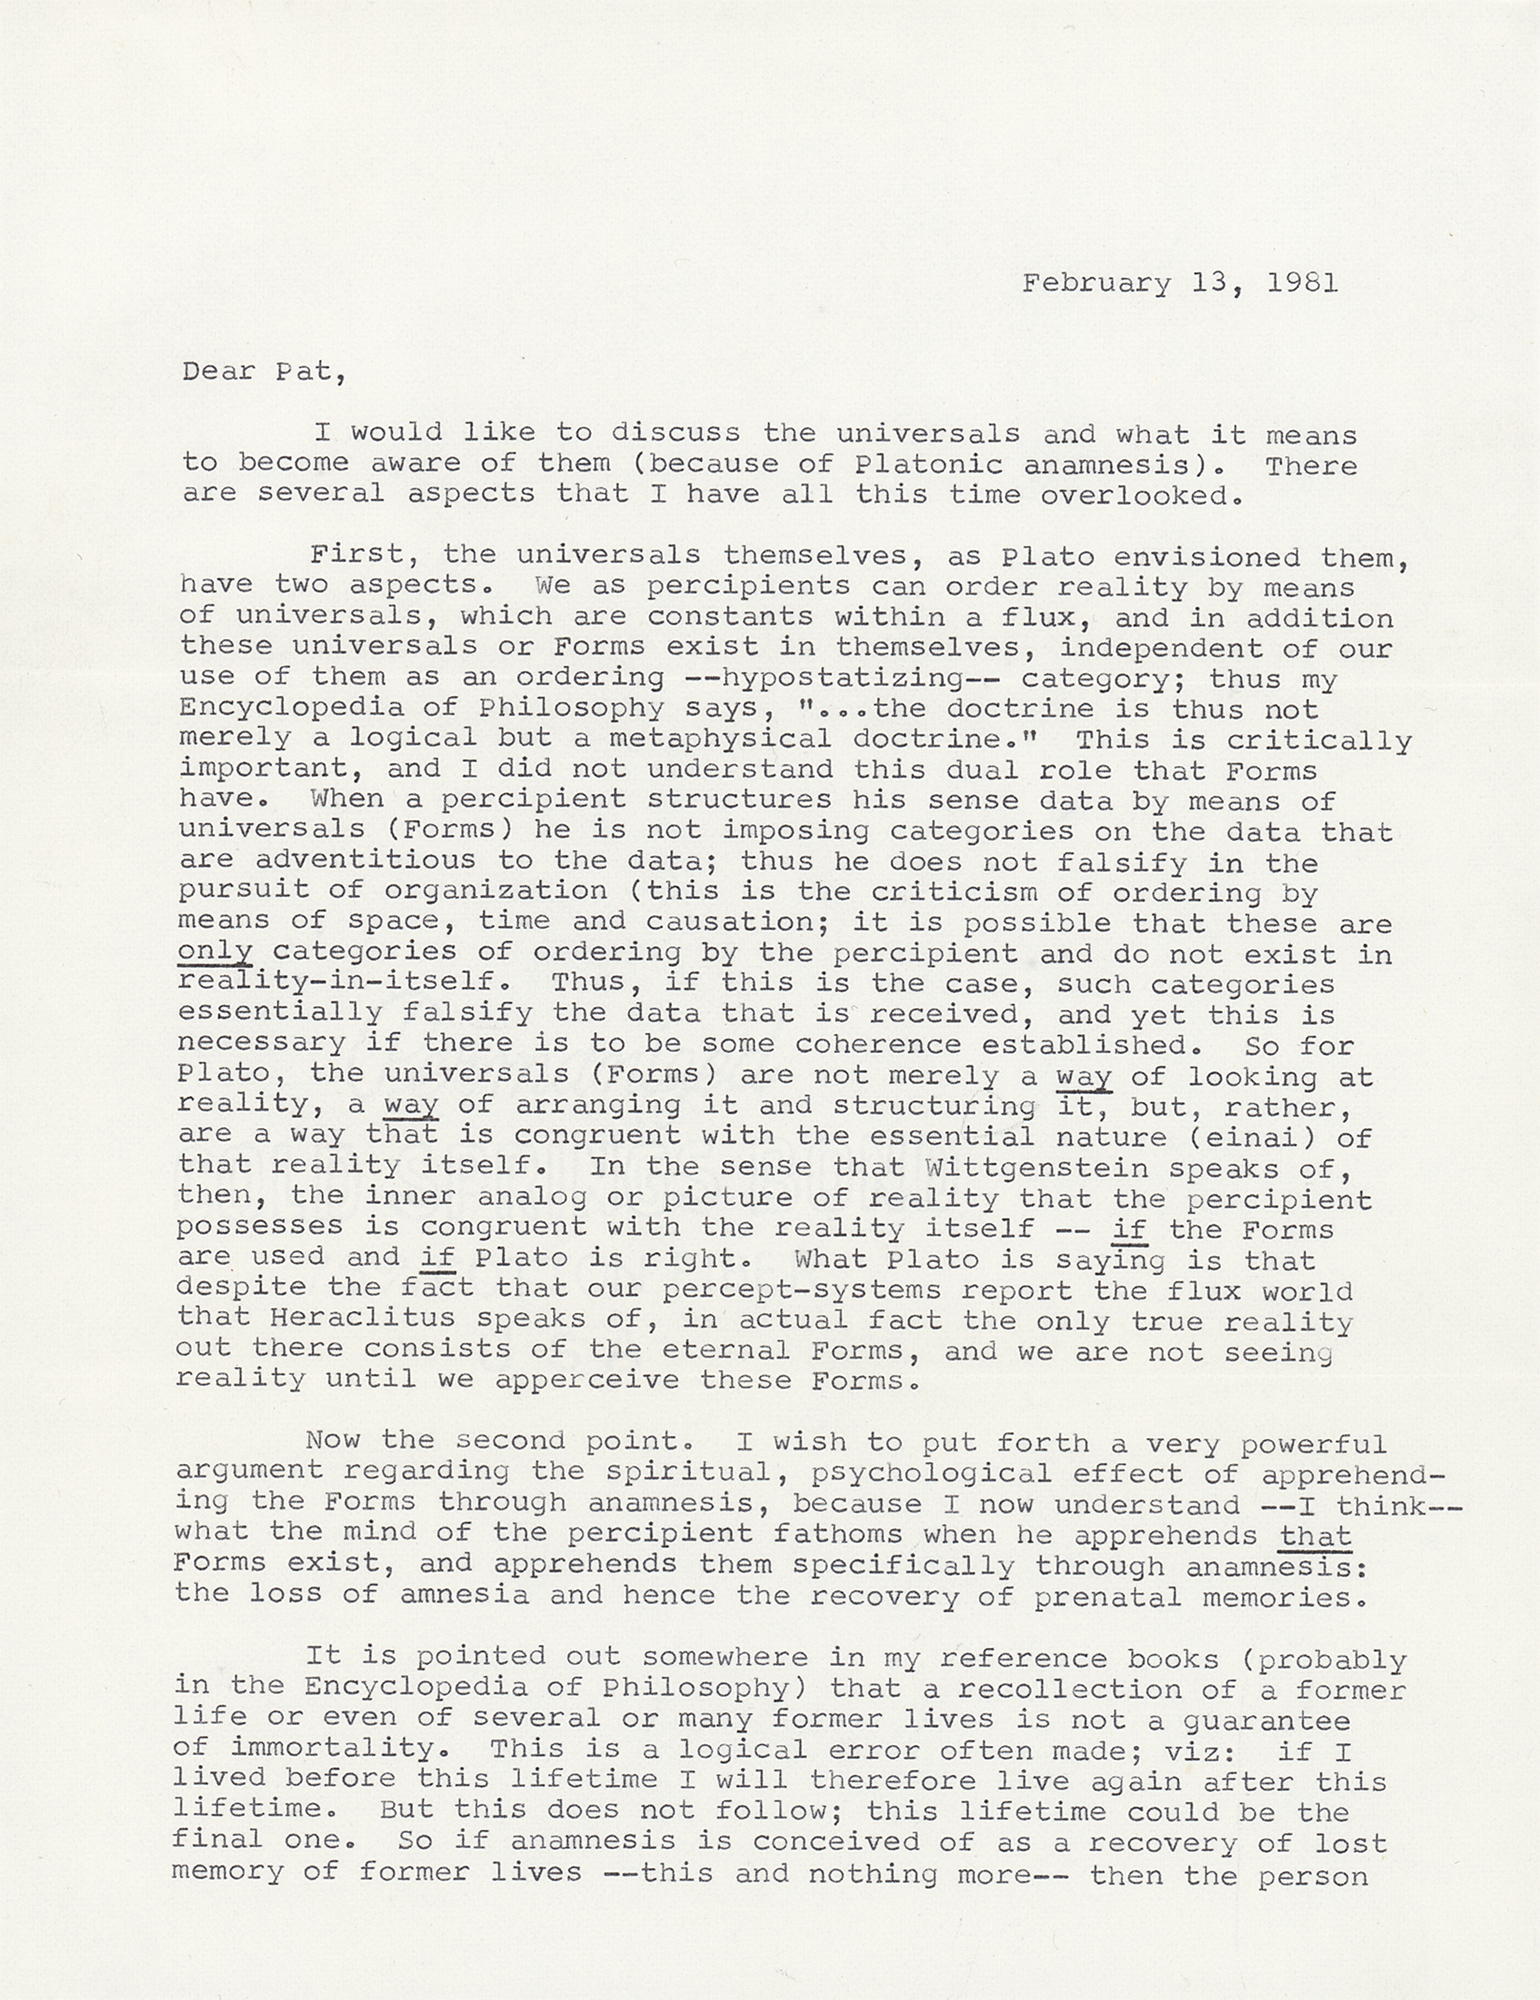 Lot #424 Philip K. Dick Typed Letter Signed